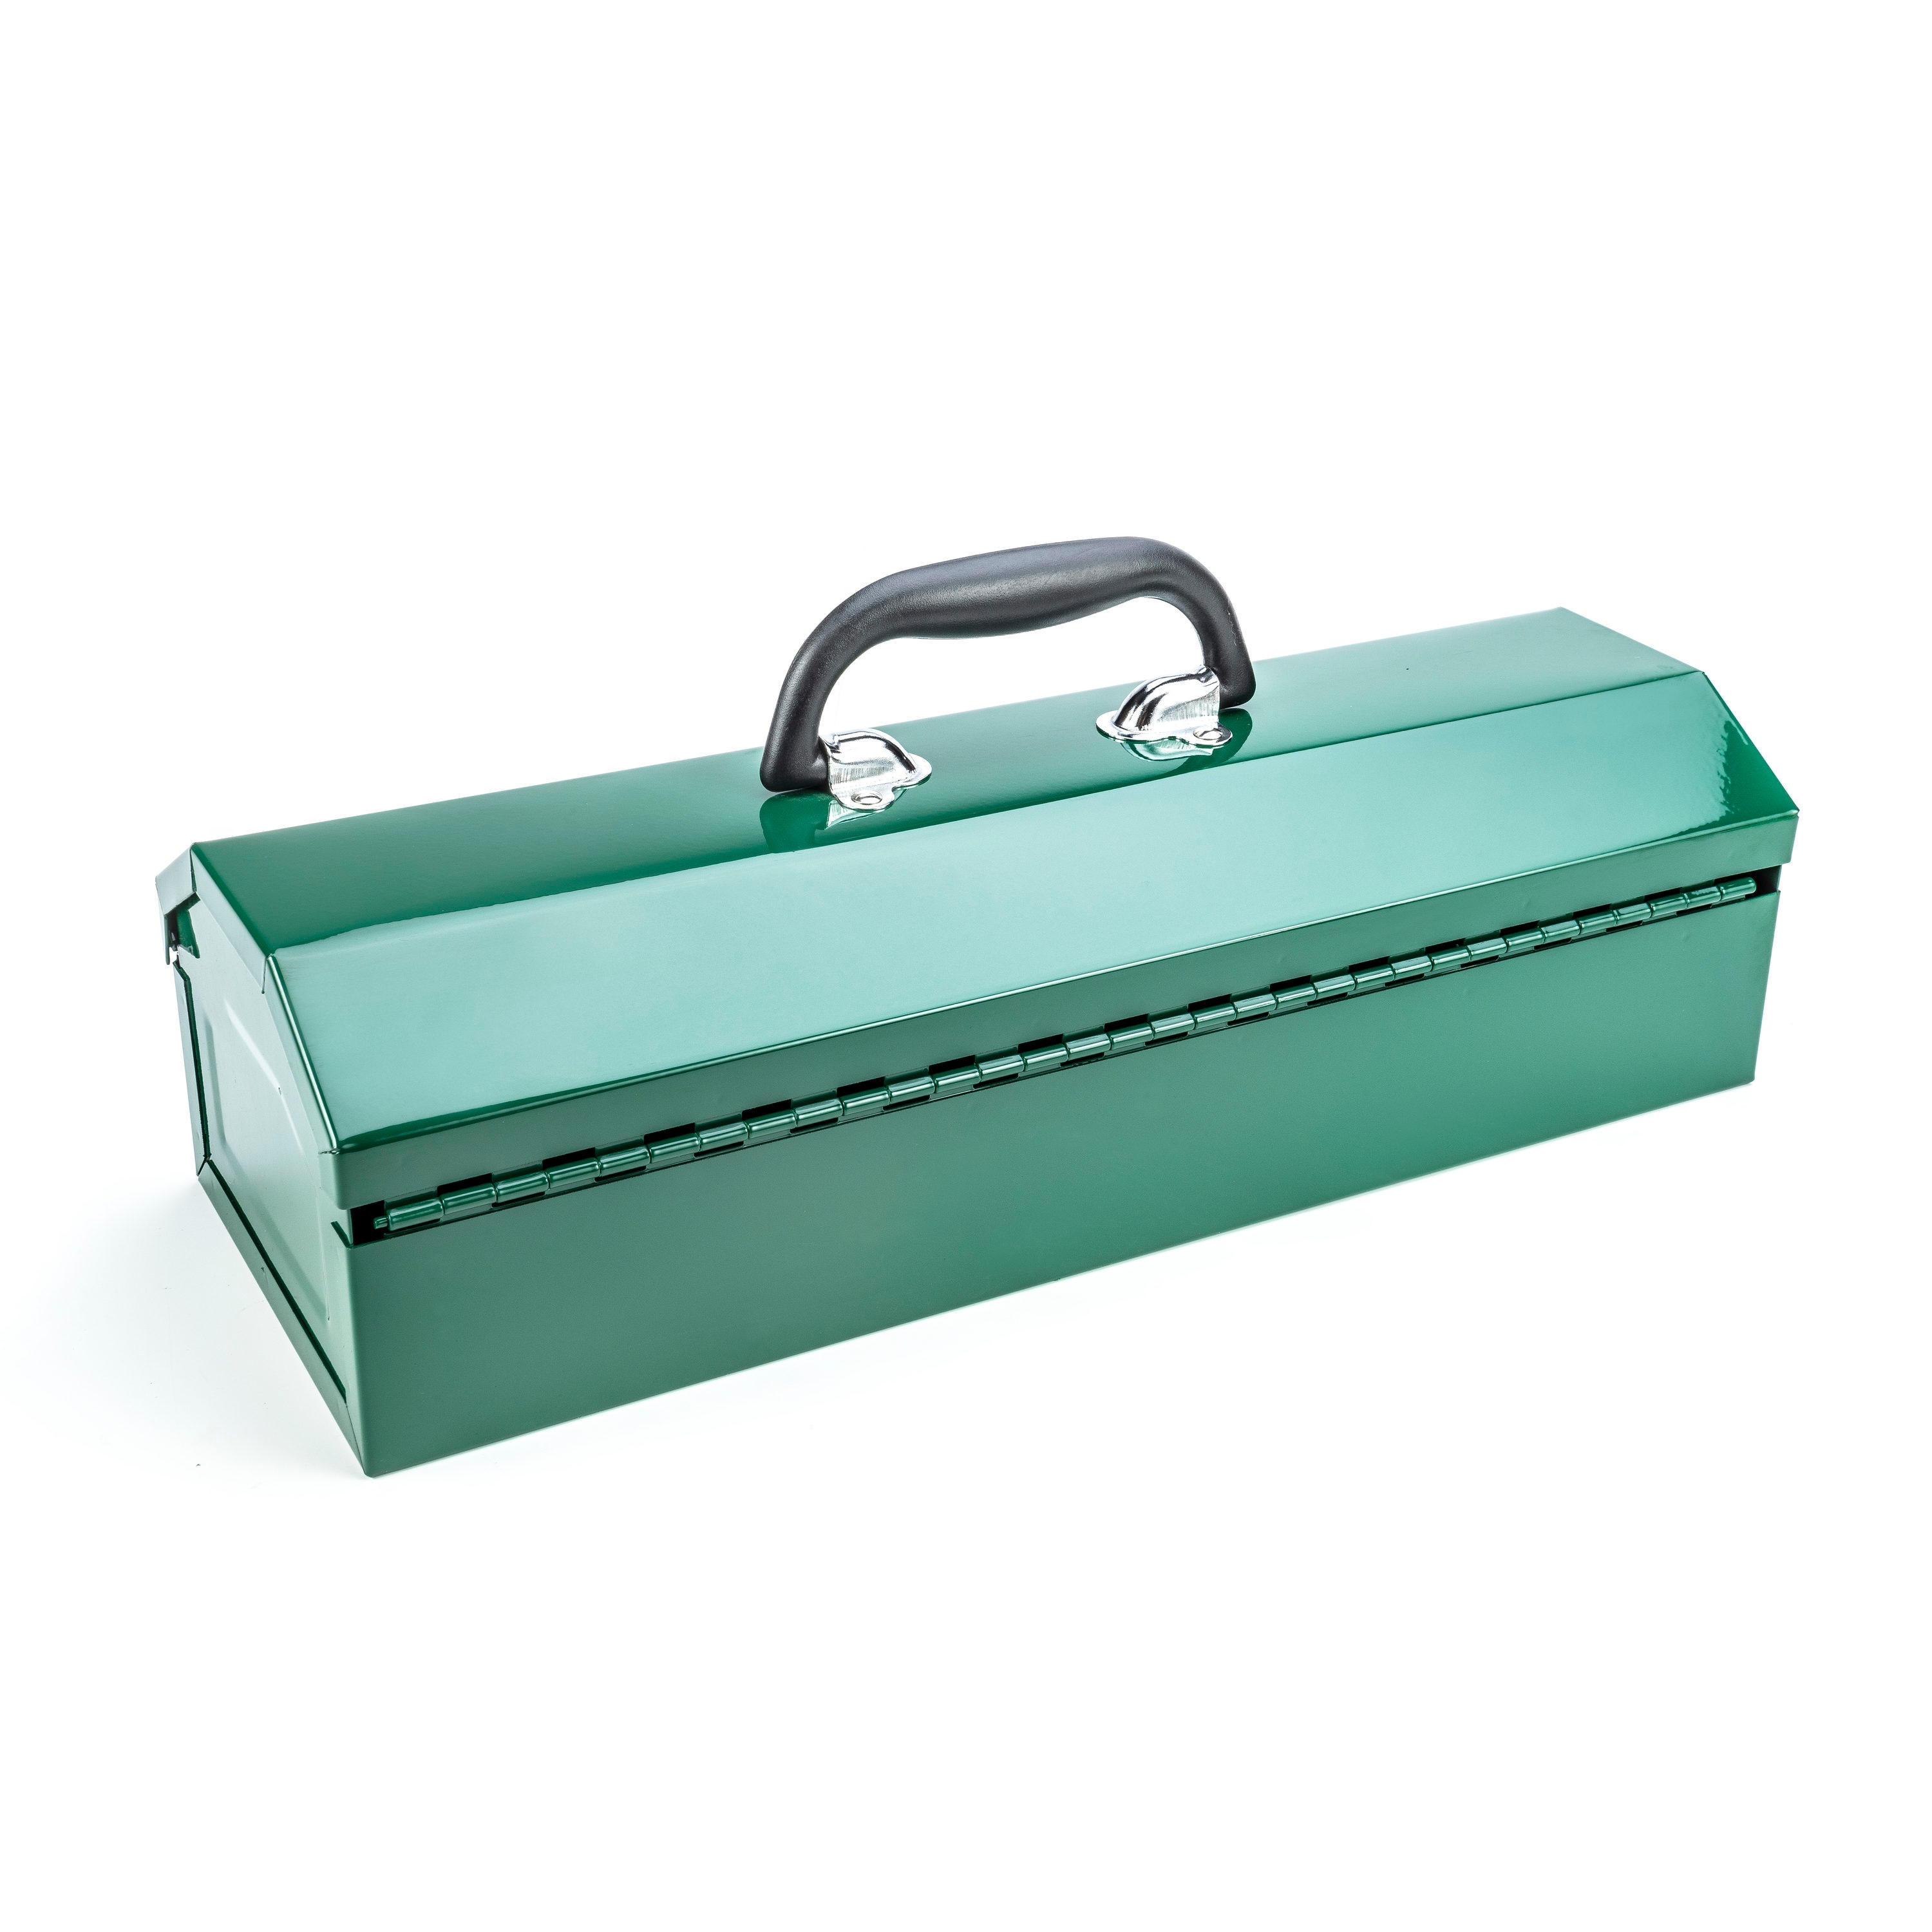 SATA 16-in Green Steel Lockable Tool Box in the Portable Tool Boxes ...